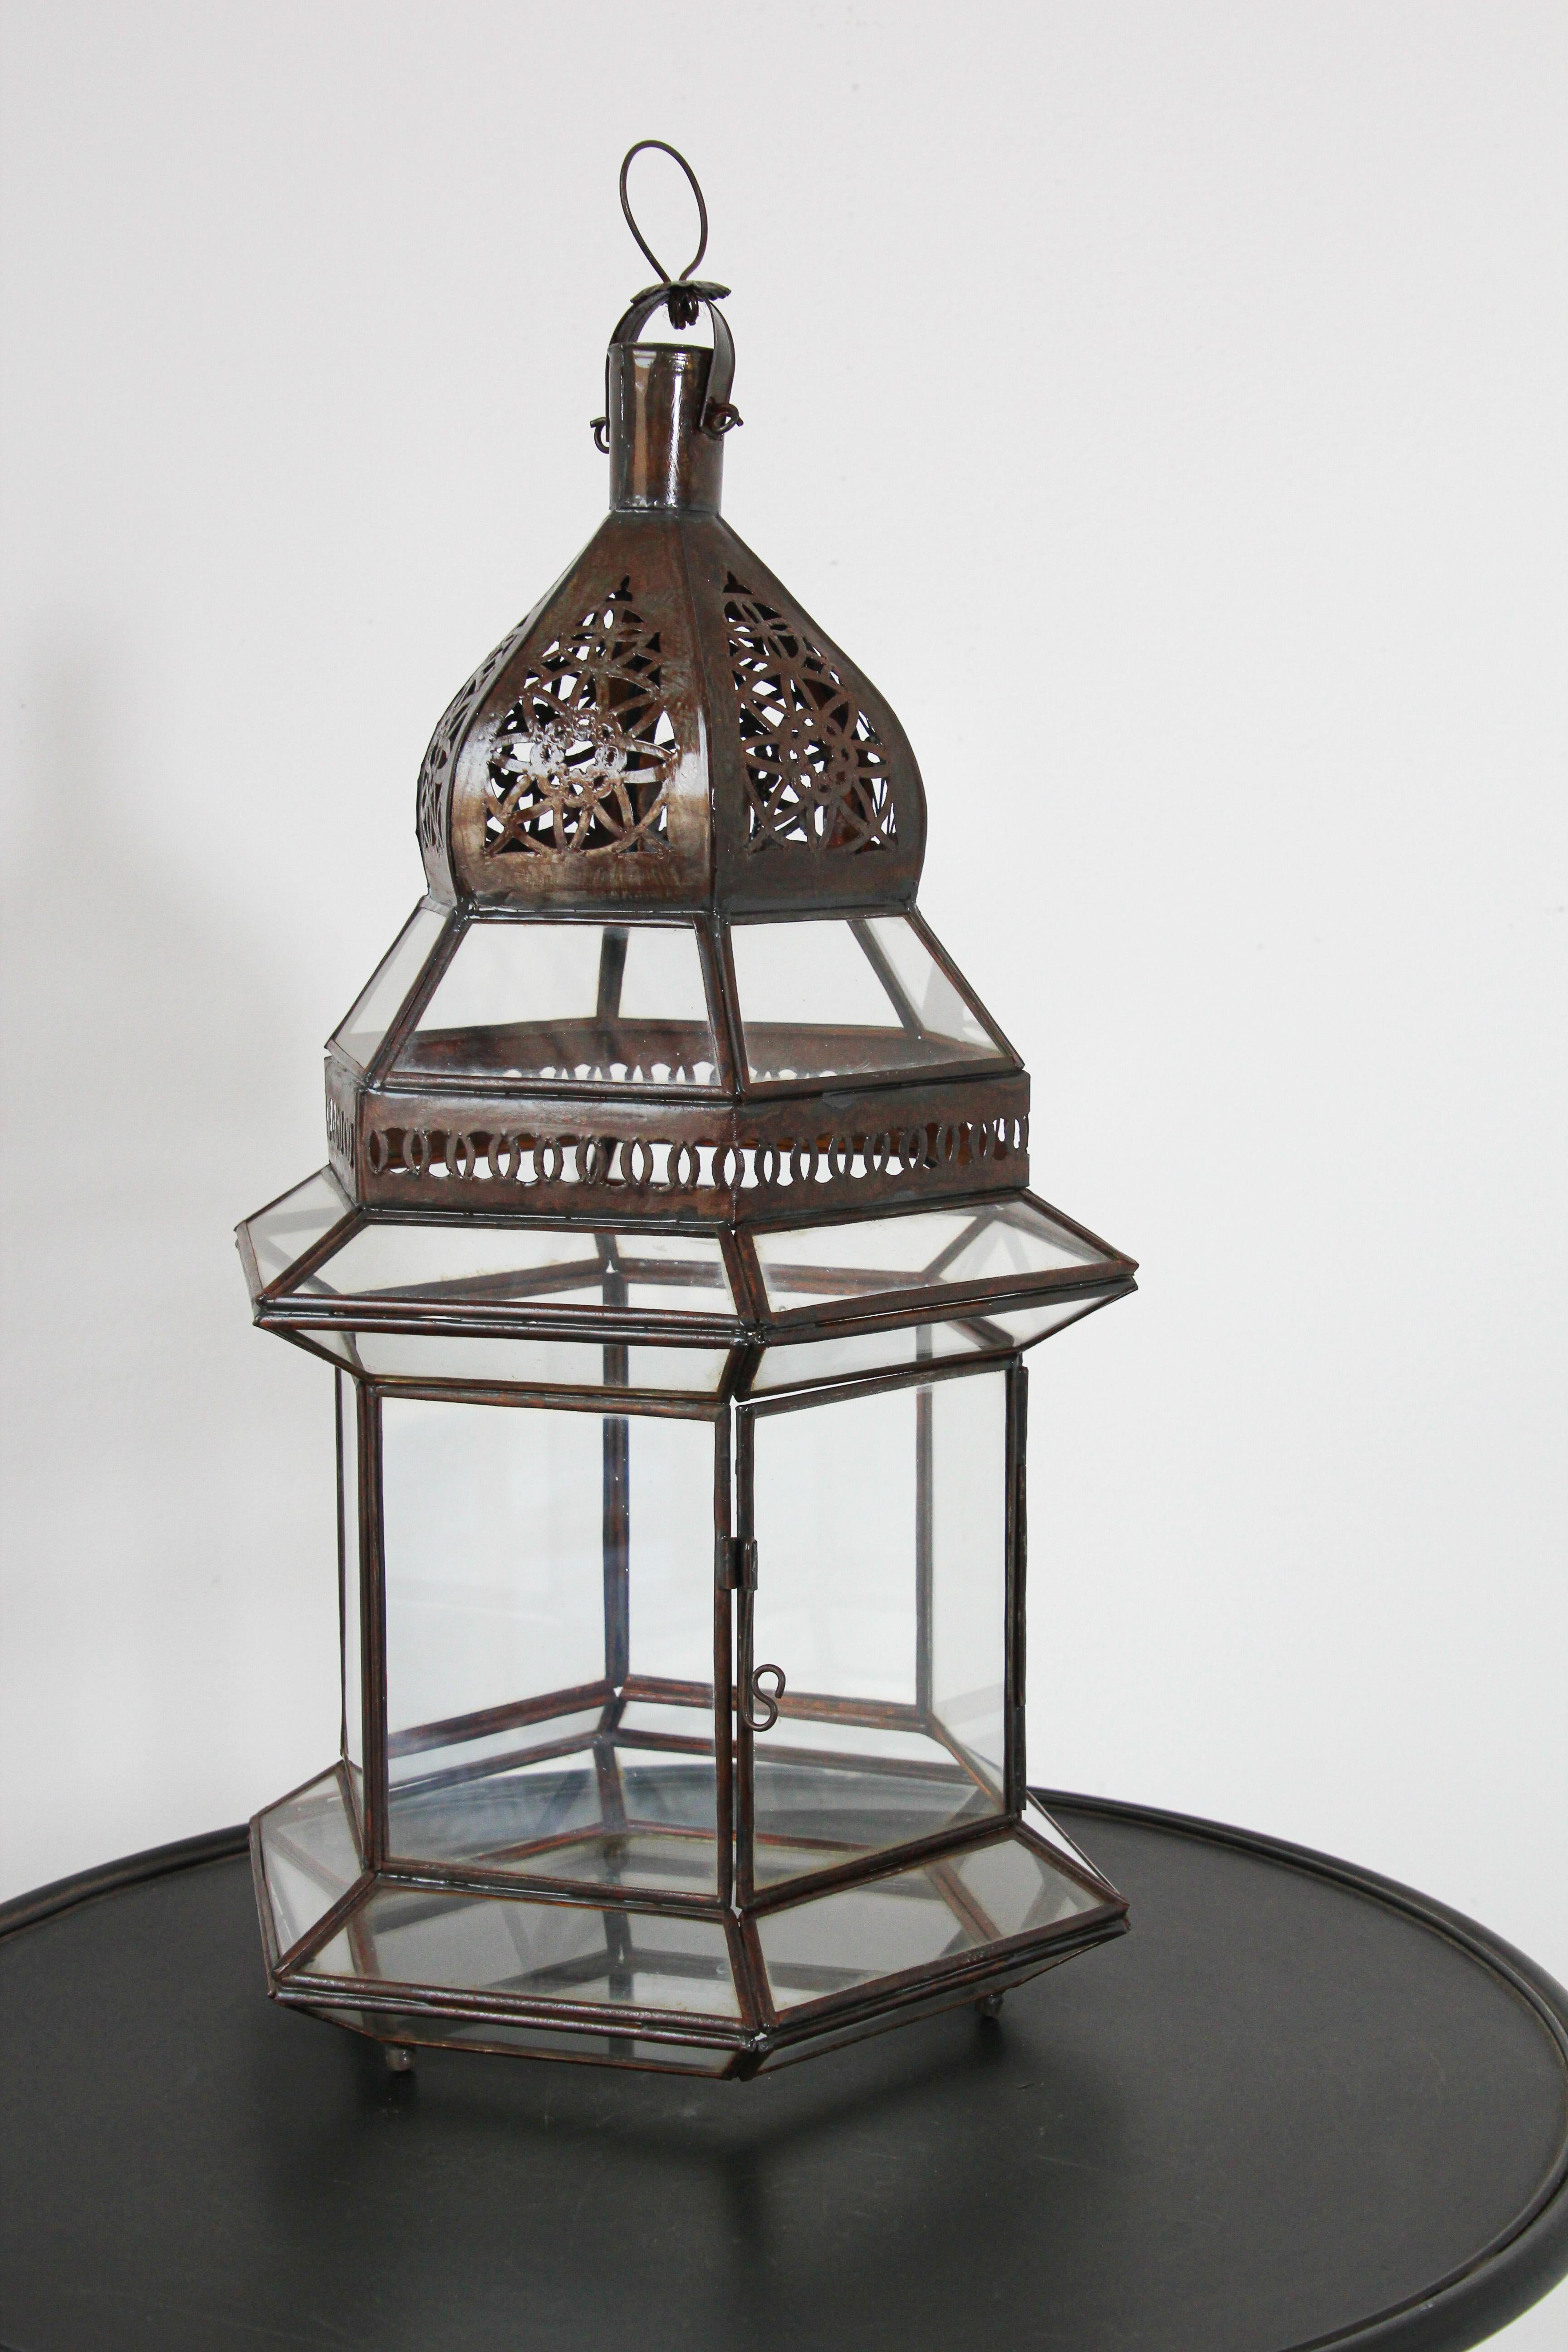 Large Moroccan metal and clear glass lanterns.Hurricane candle lamp in hexagonal shape with vintage rust color metal finish.The top of the lantern is handcut with Moorish designs.The lantern has a small door to access the inside.Many of our